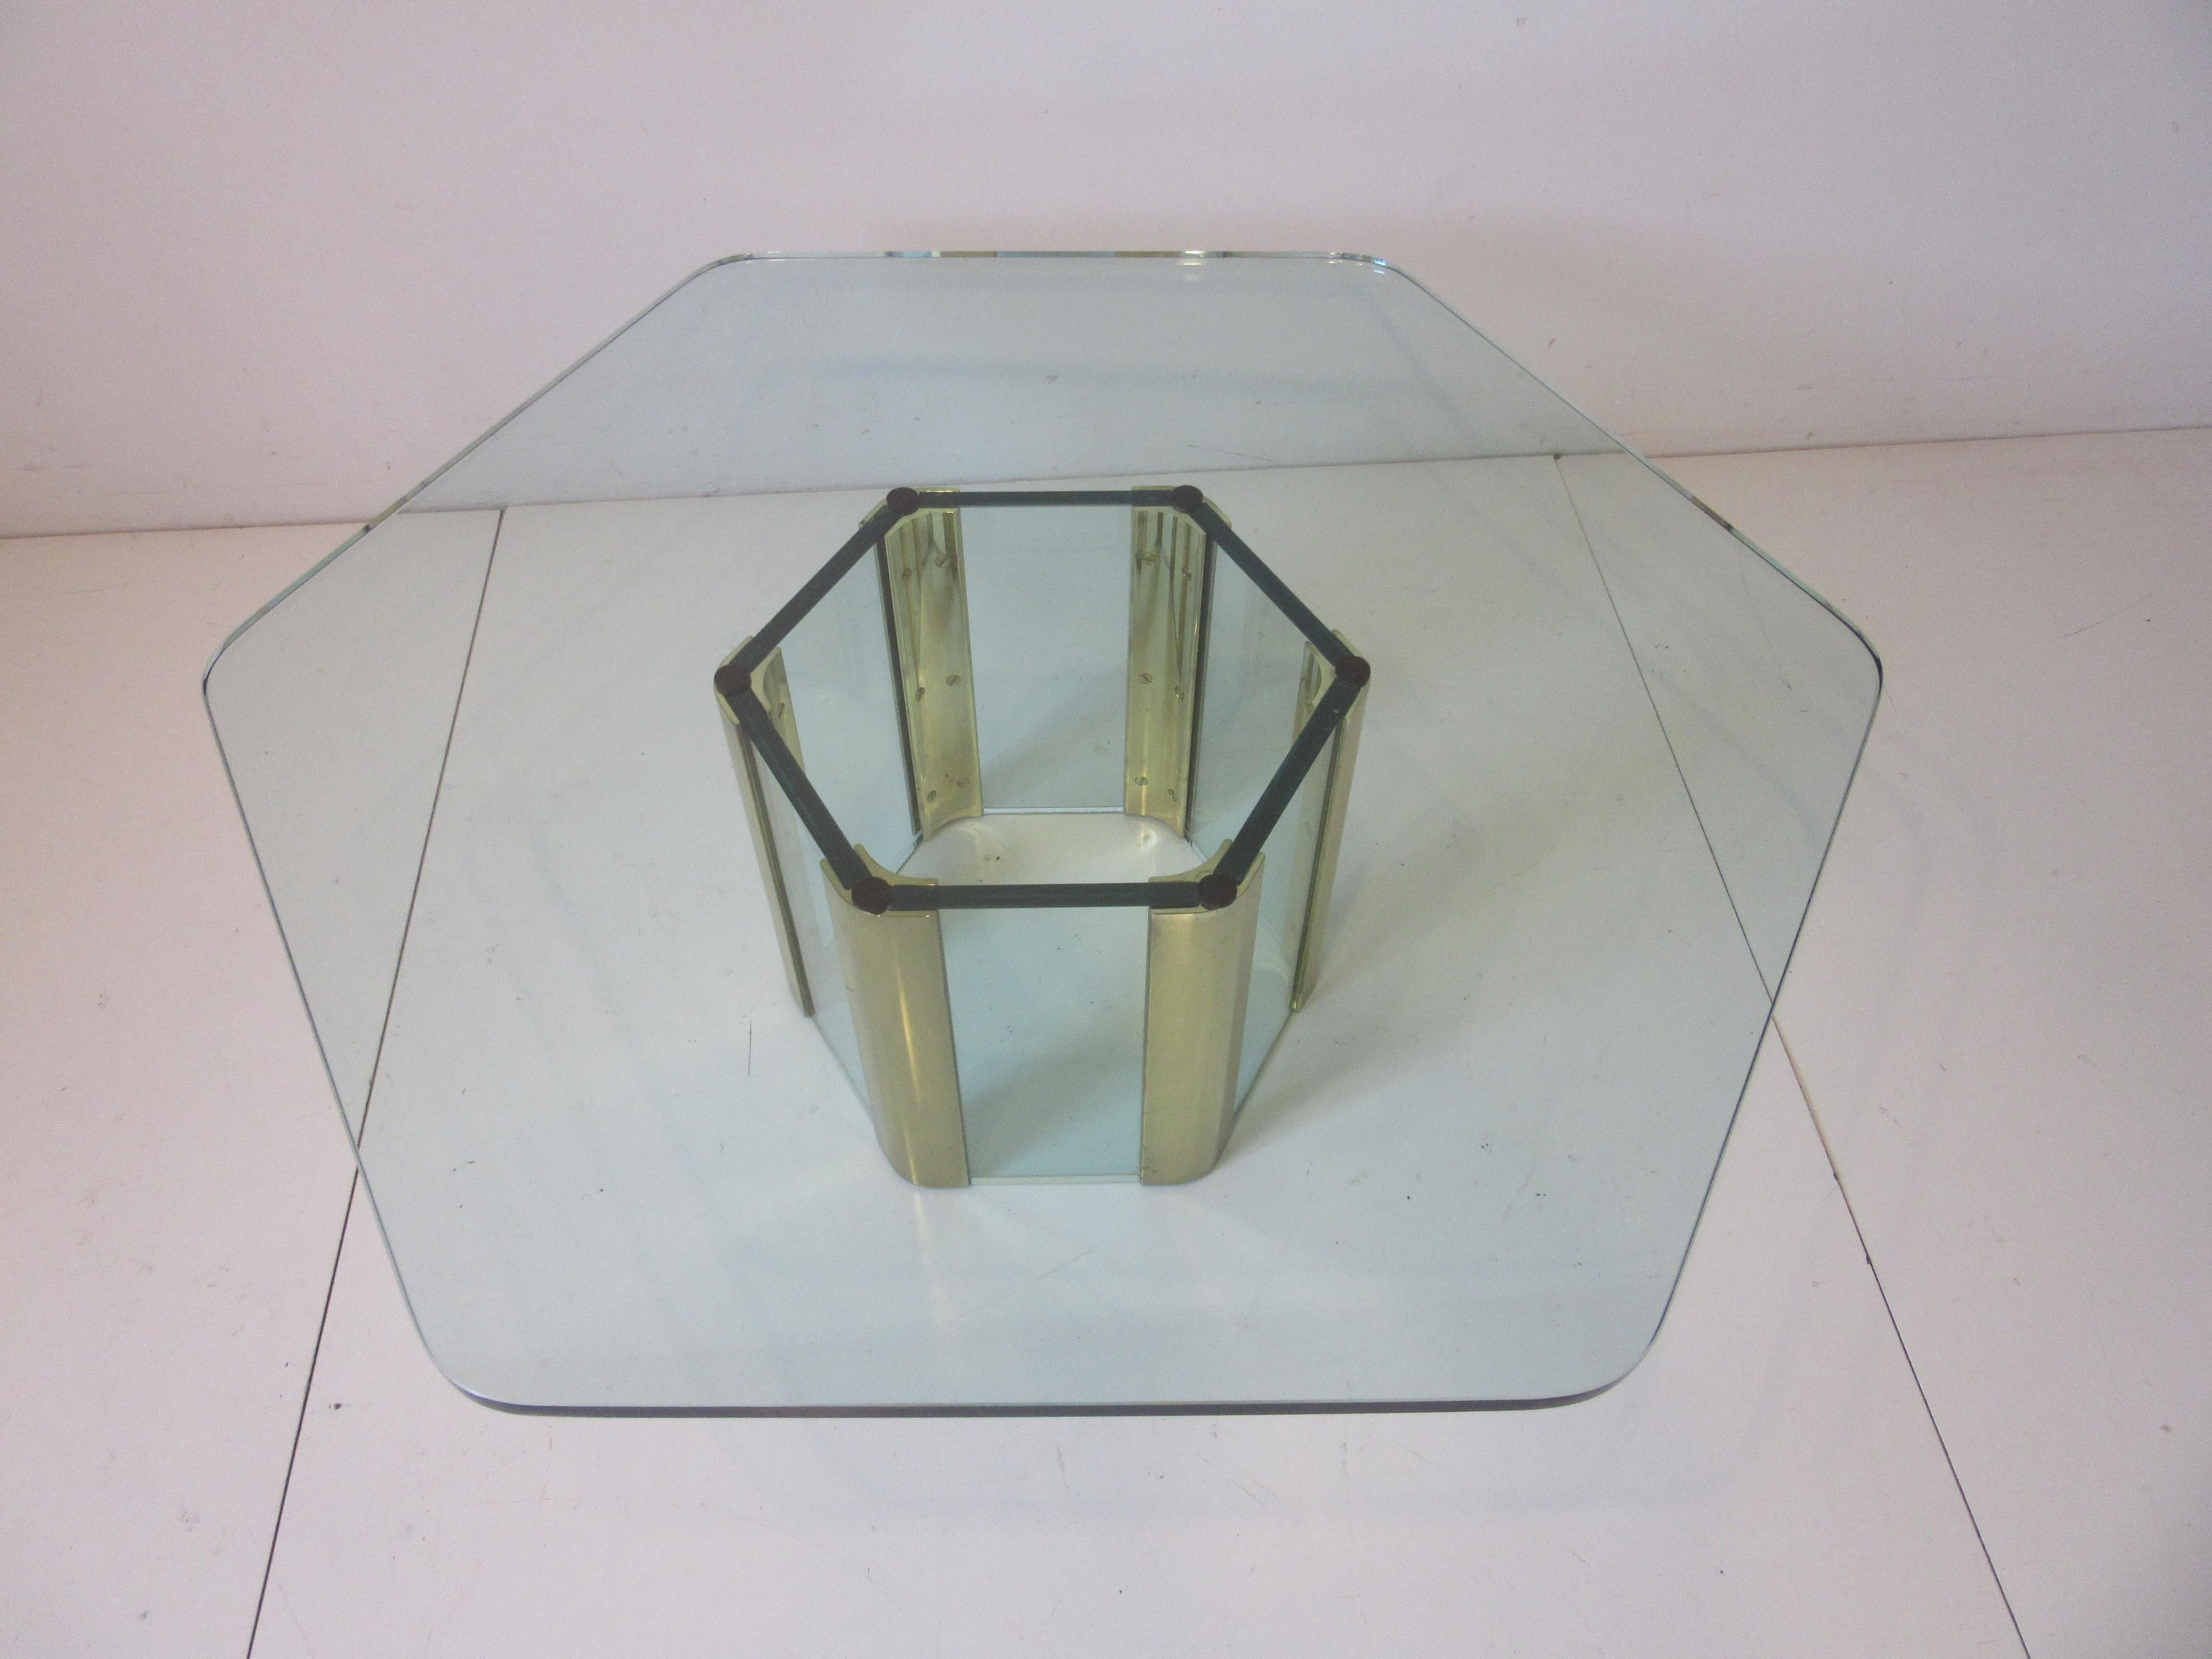 American Leon Pace Brass / Plate Glass Hexagon Coffee Table for Pace